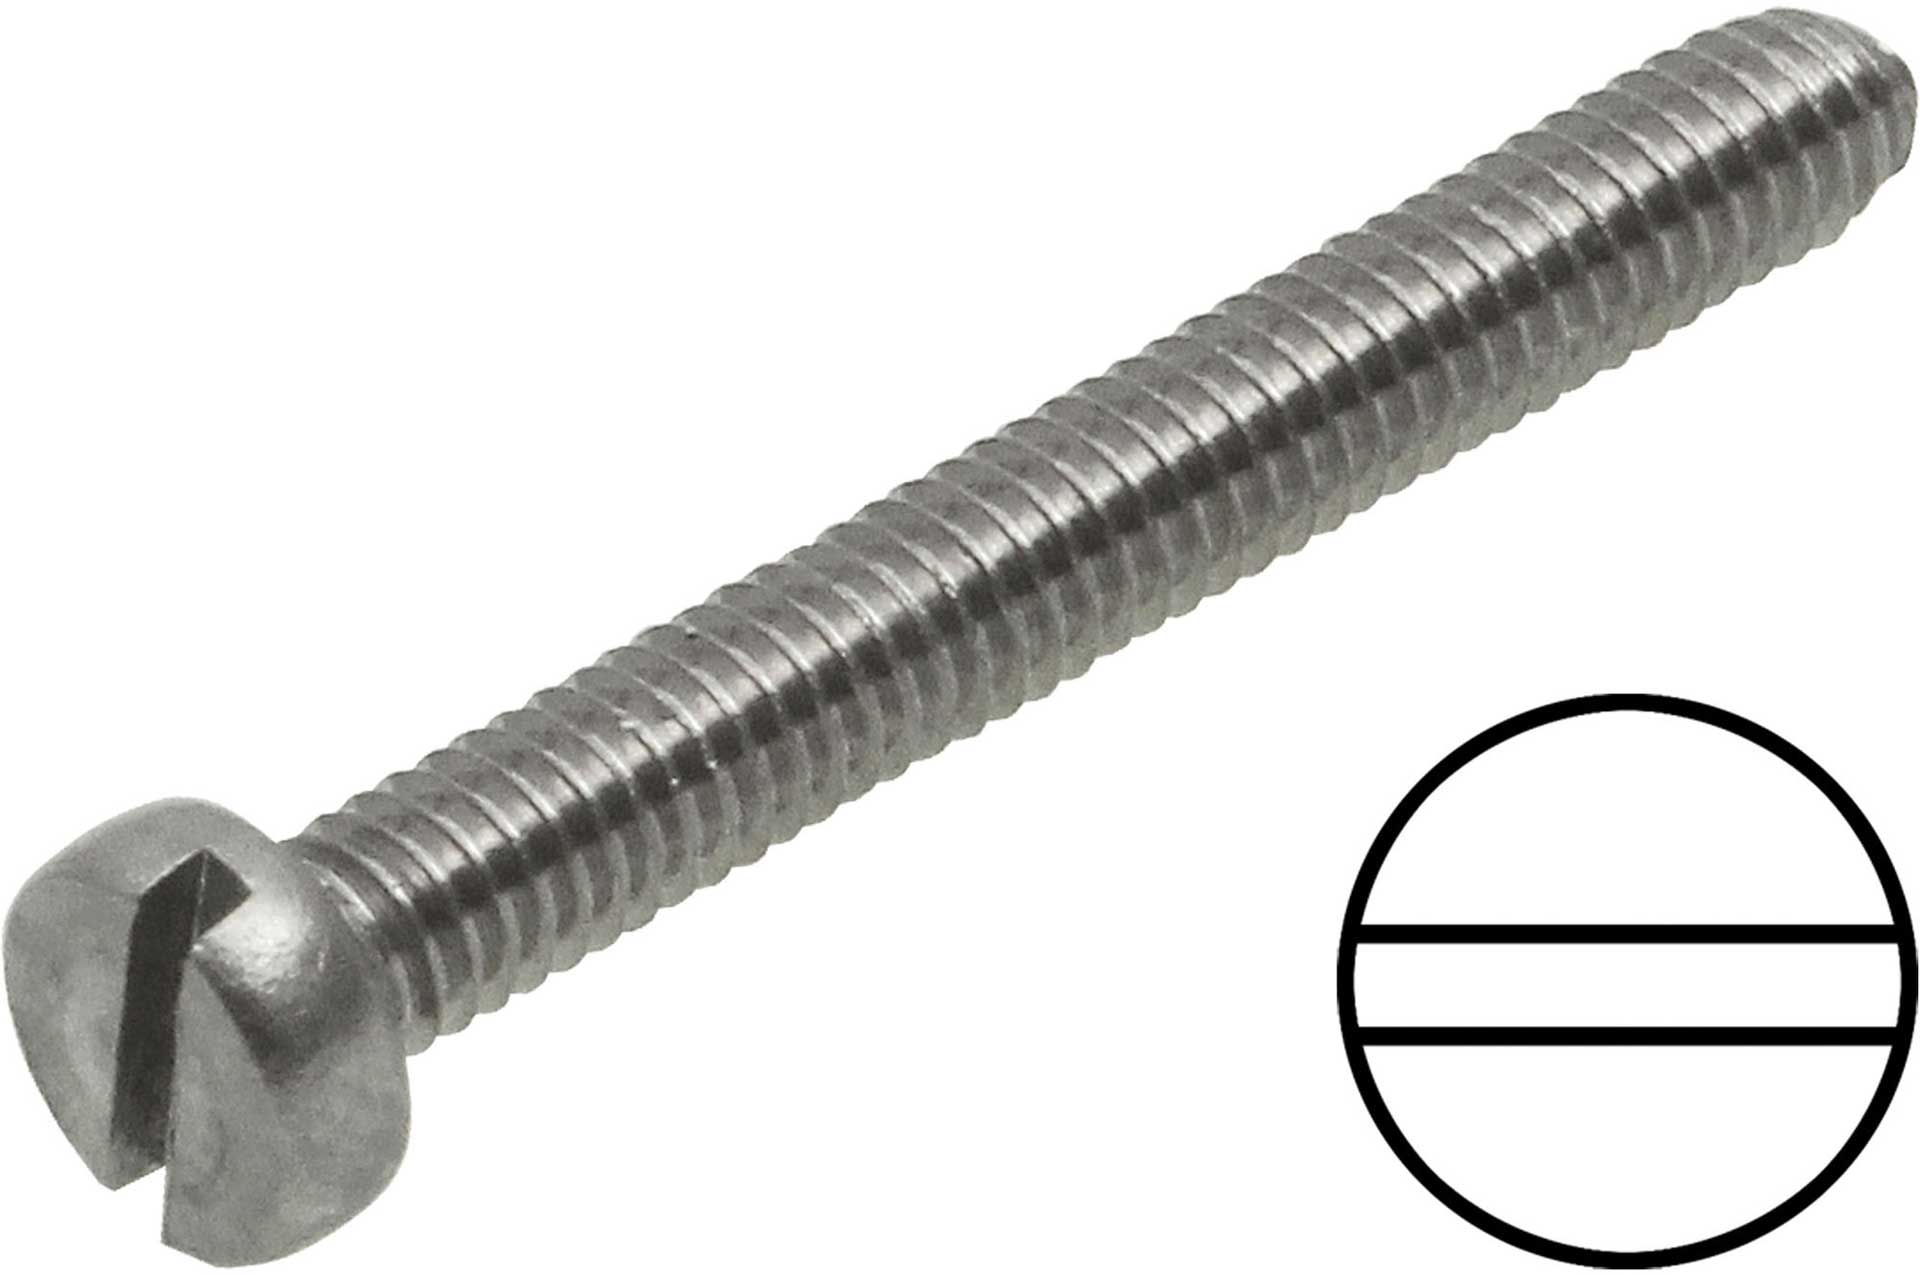 Modellbau Lindinger CHEESE-HEAD BOLTS M2.5/6MM STAINLESS STEEL, 10PCS.